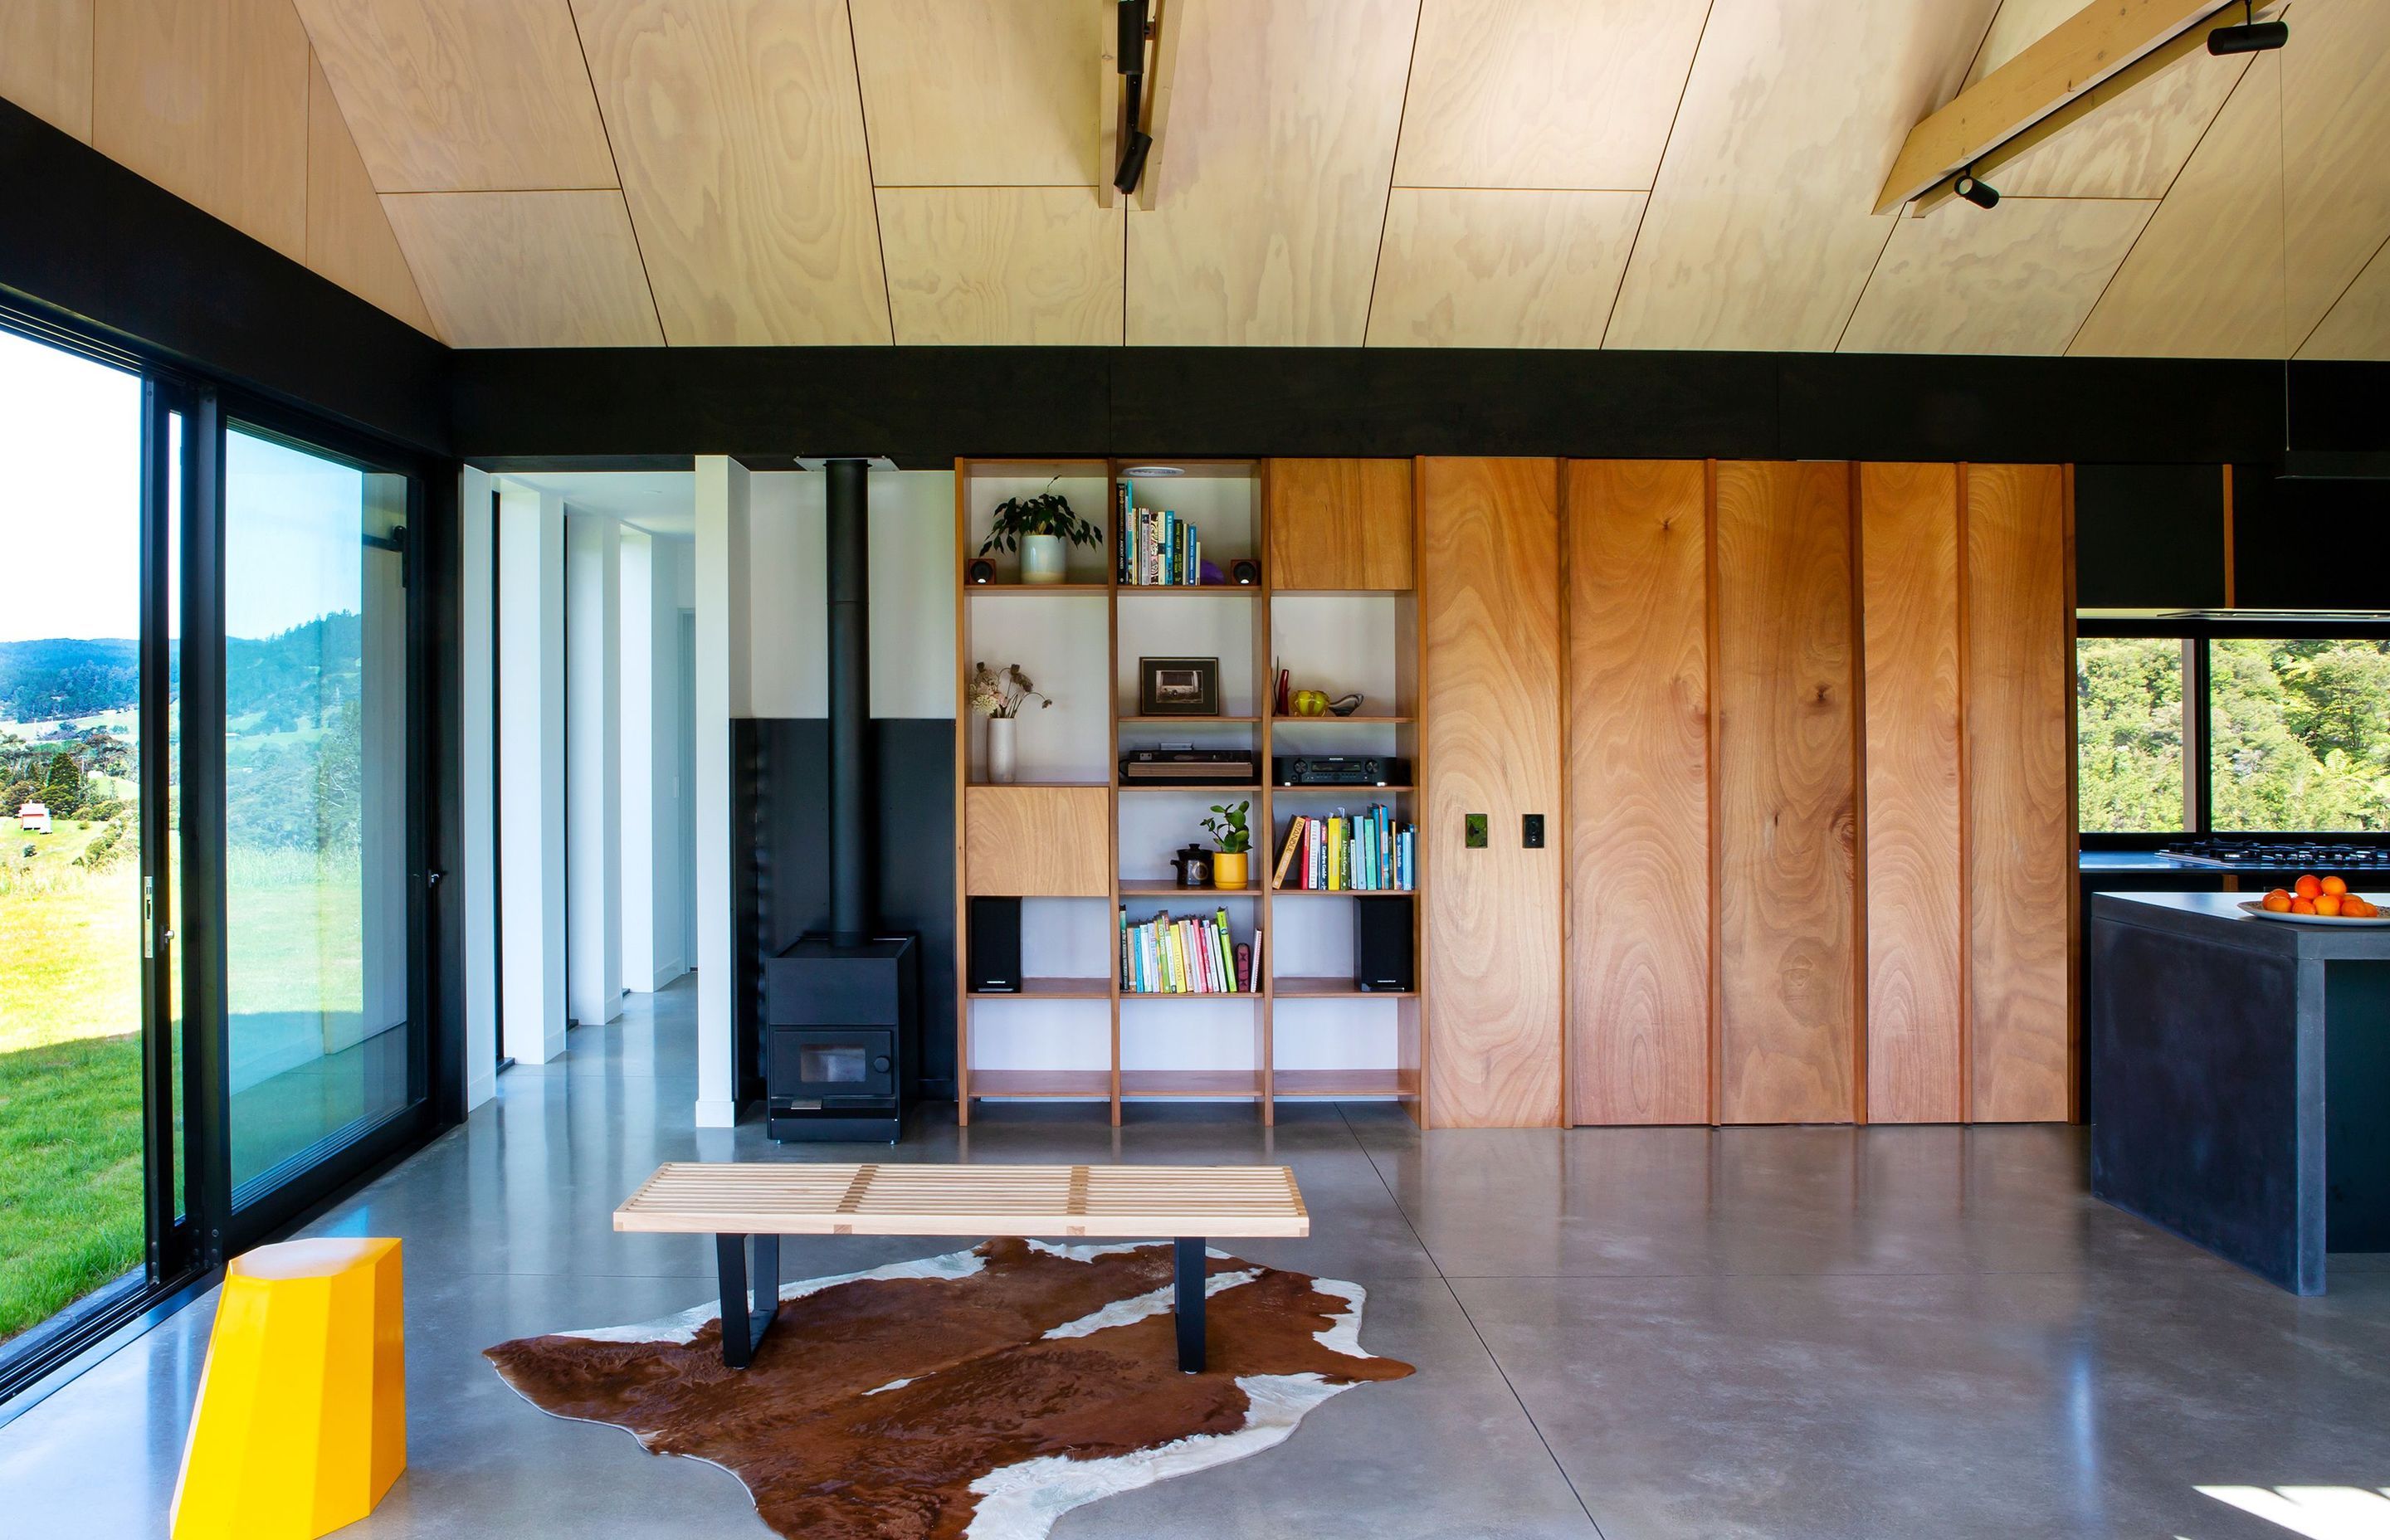 An exposed concrete slab is combined with simple materials dominated by timber with a whitewashed ply ceiling.